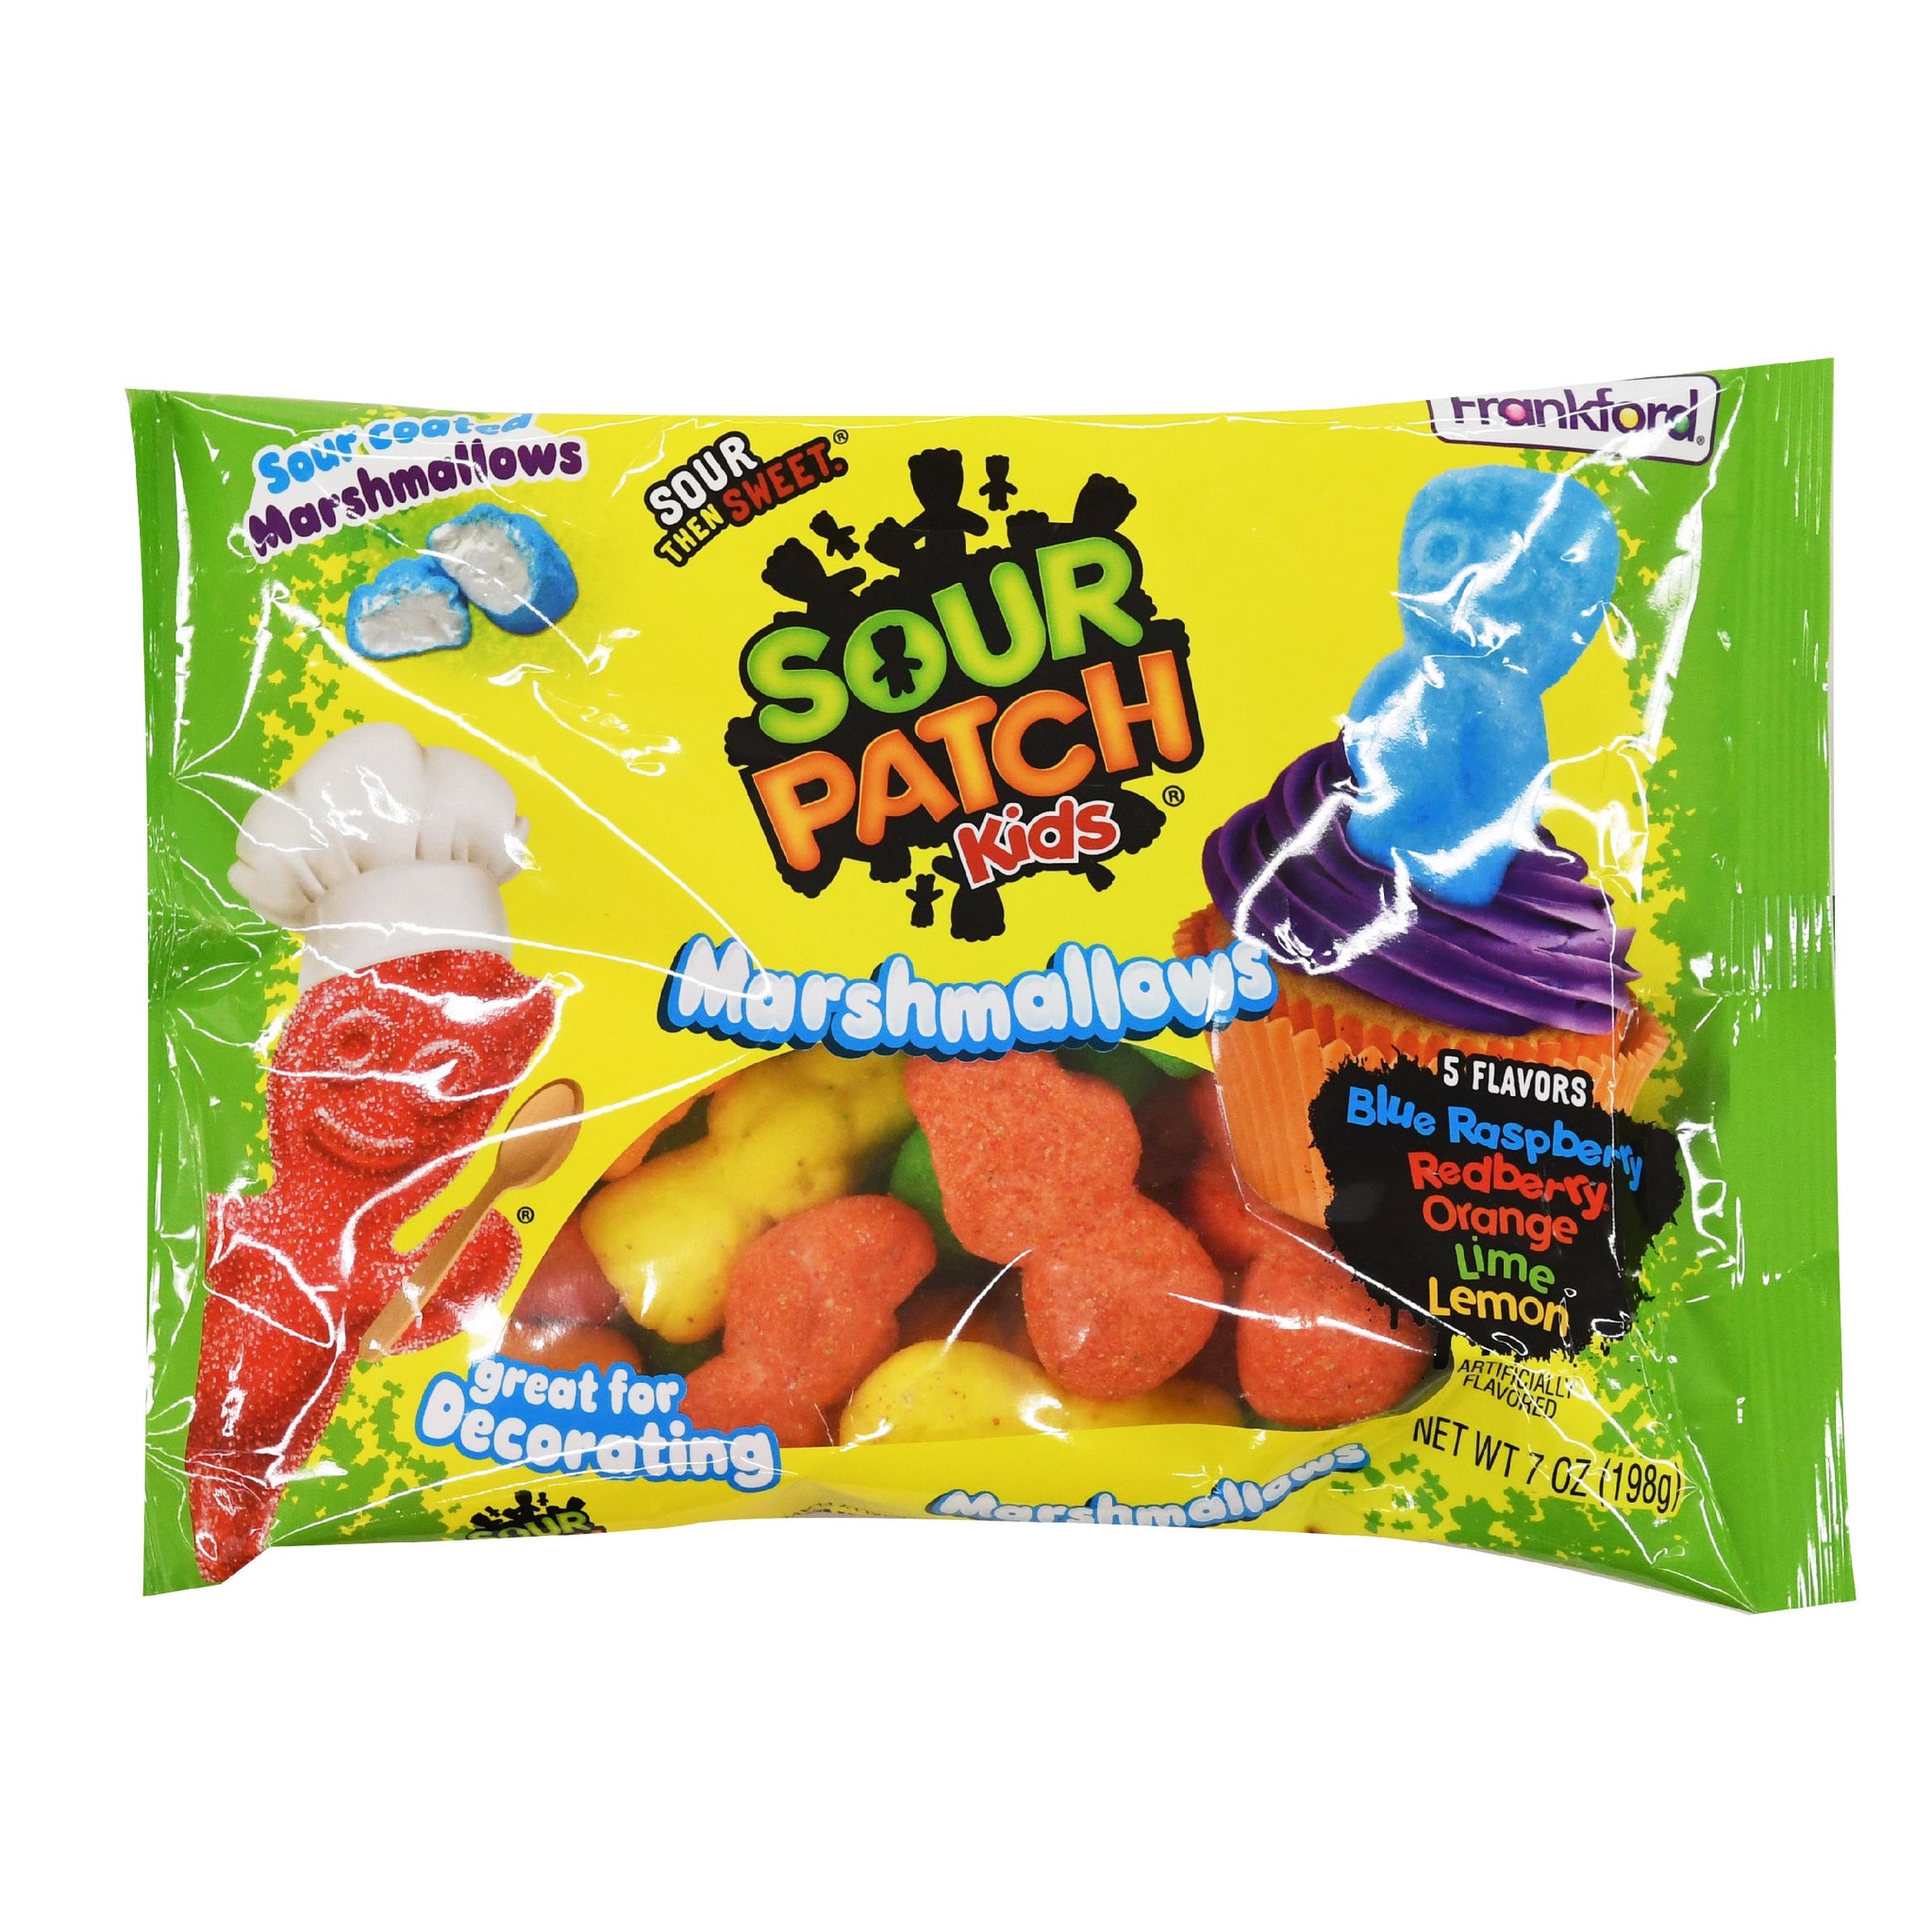 Sour Patch Kids Marshmallows by Frankford, 7oz